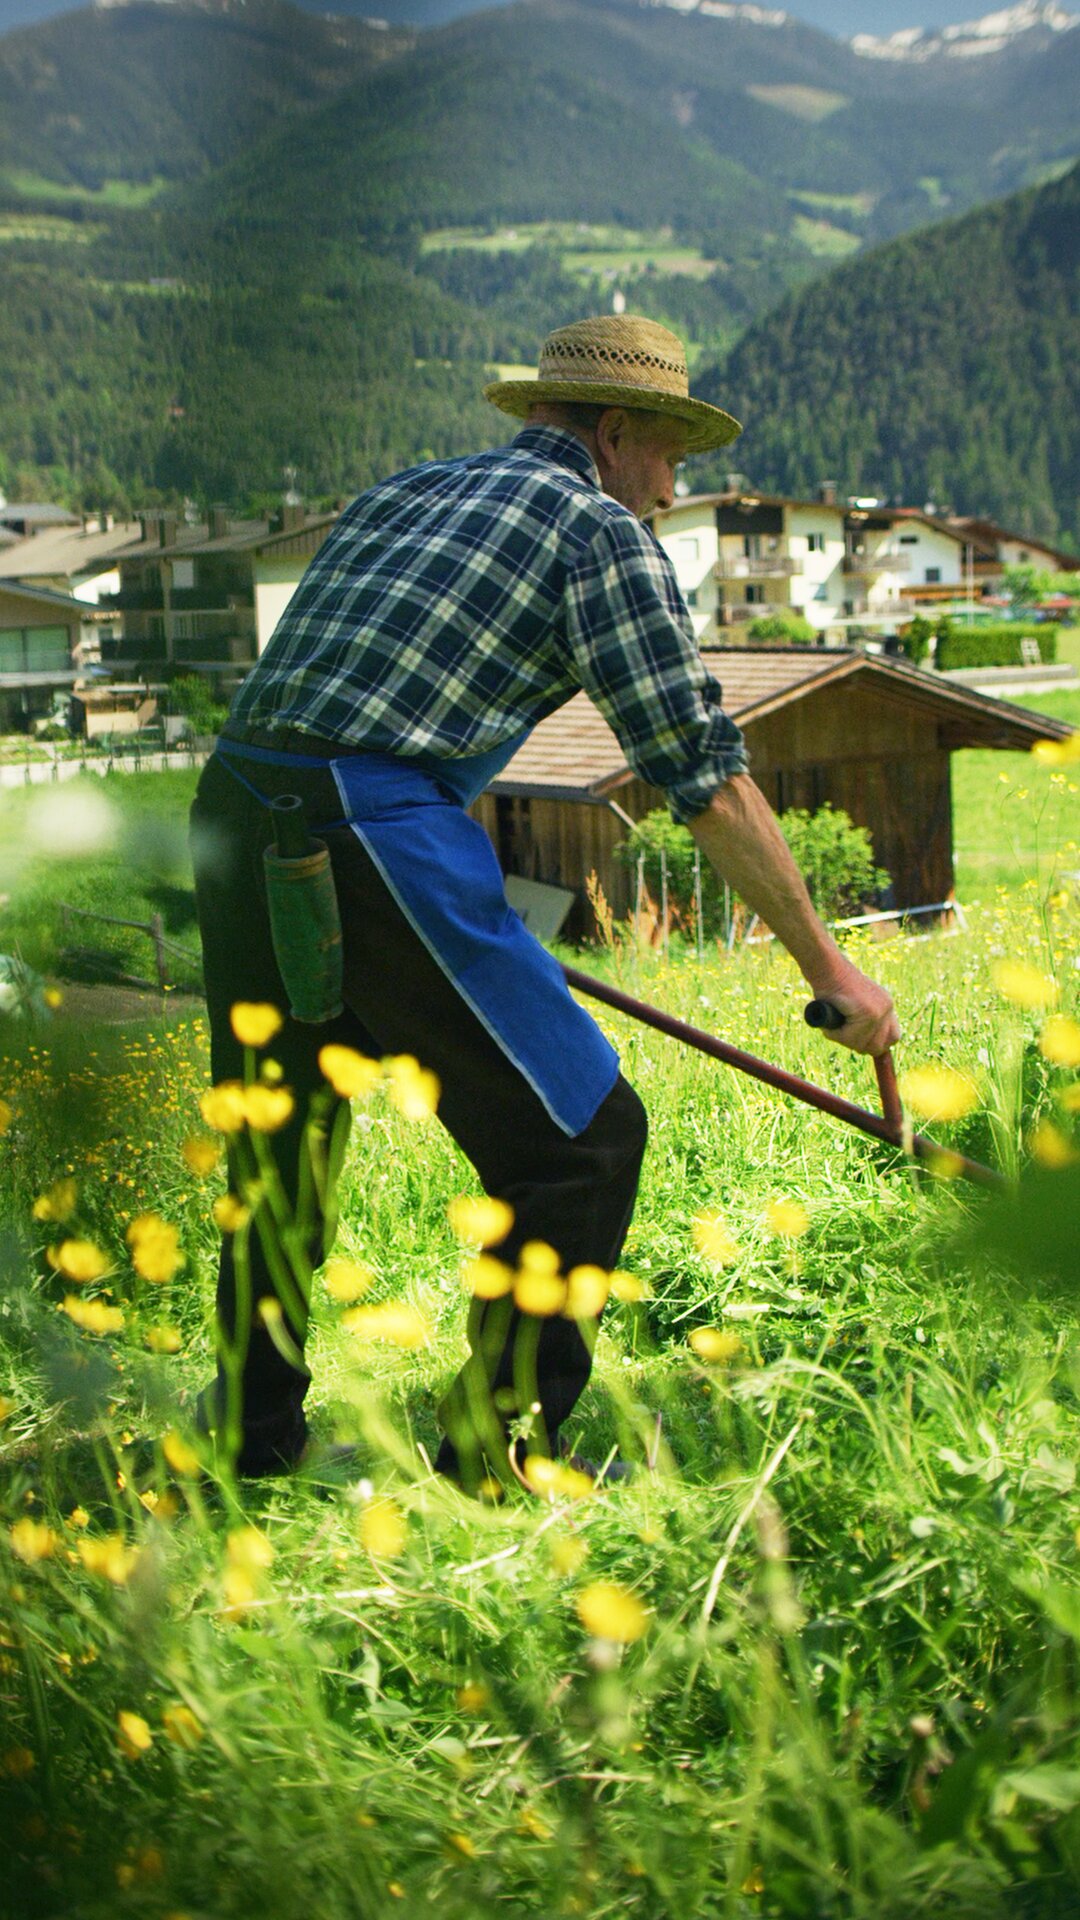 dairyman at work in a meadow